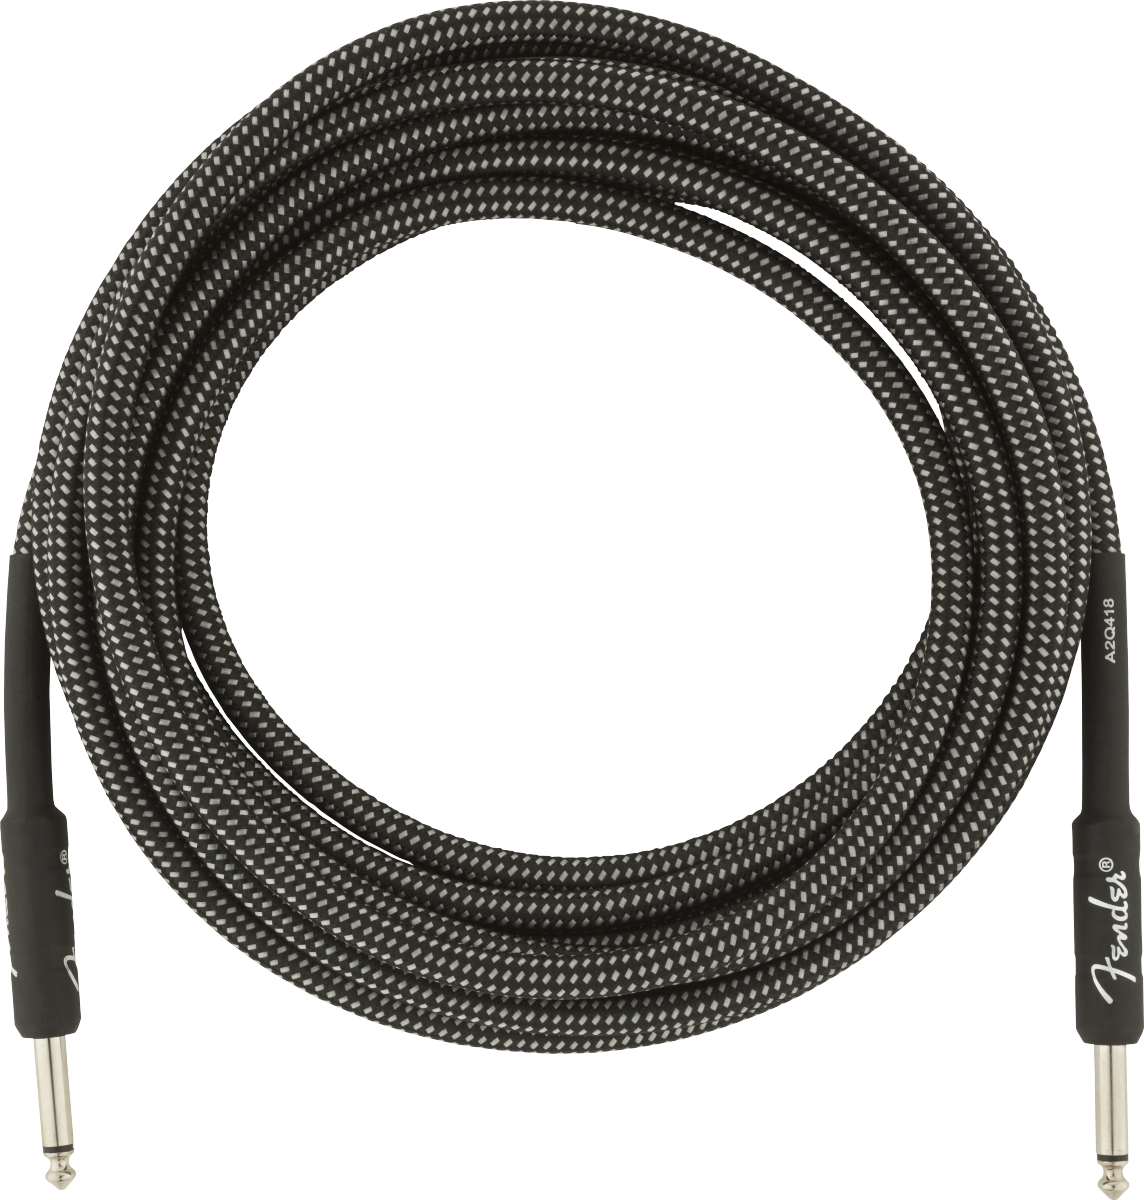 Fender® Professional Series Instrument Cable, 15', Gray Tweed